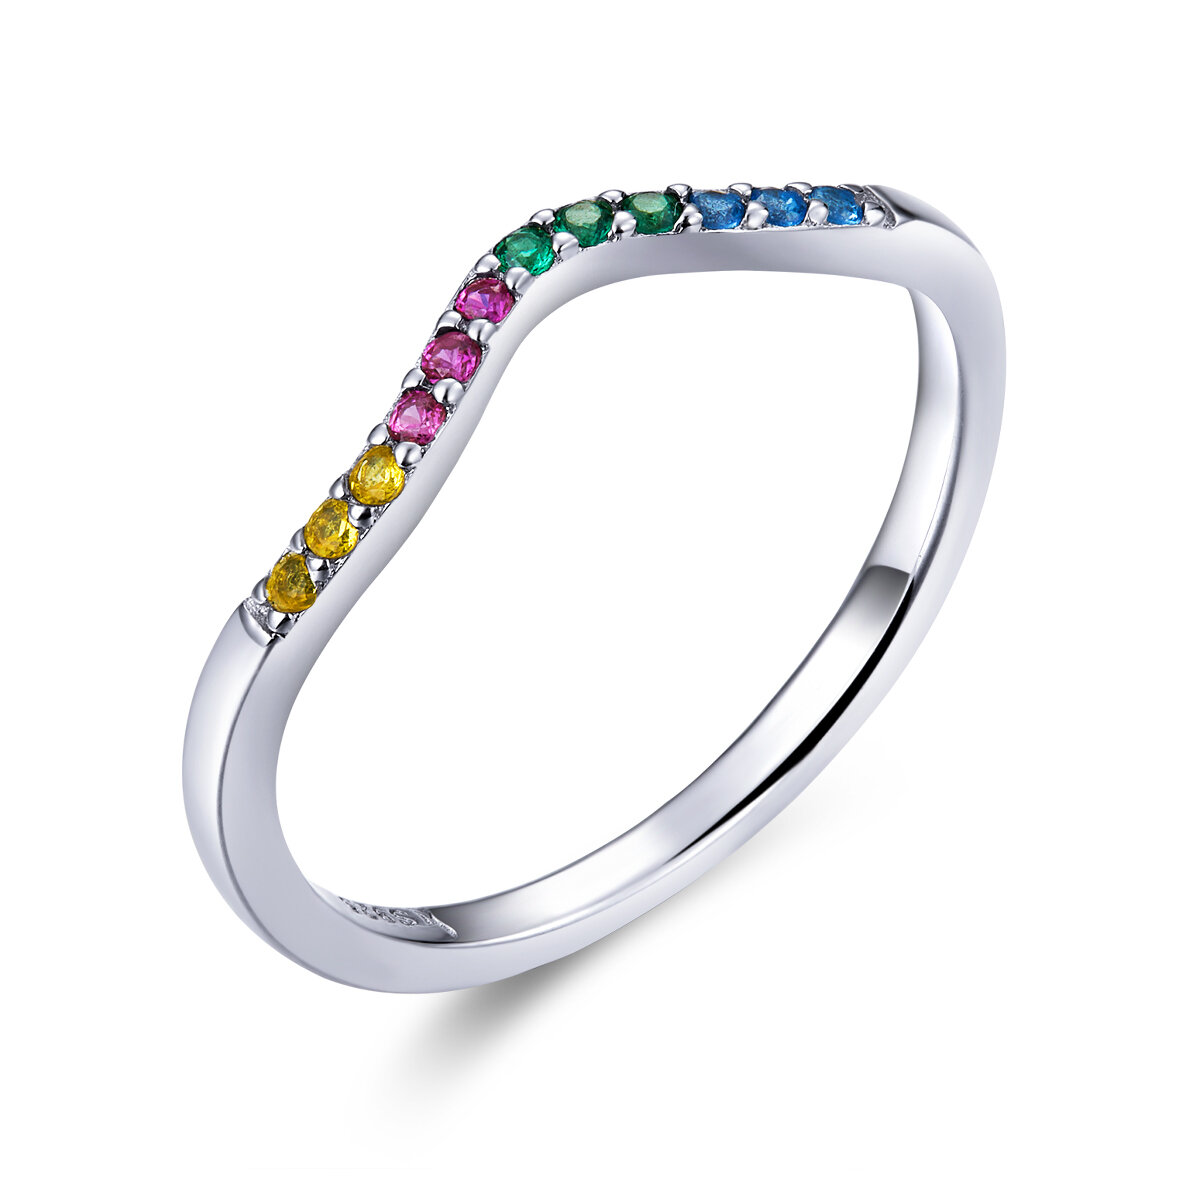 GemKing Rainbow ring S925 Sterling Silver ring